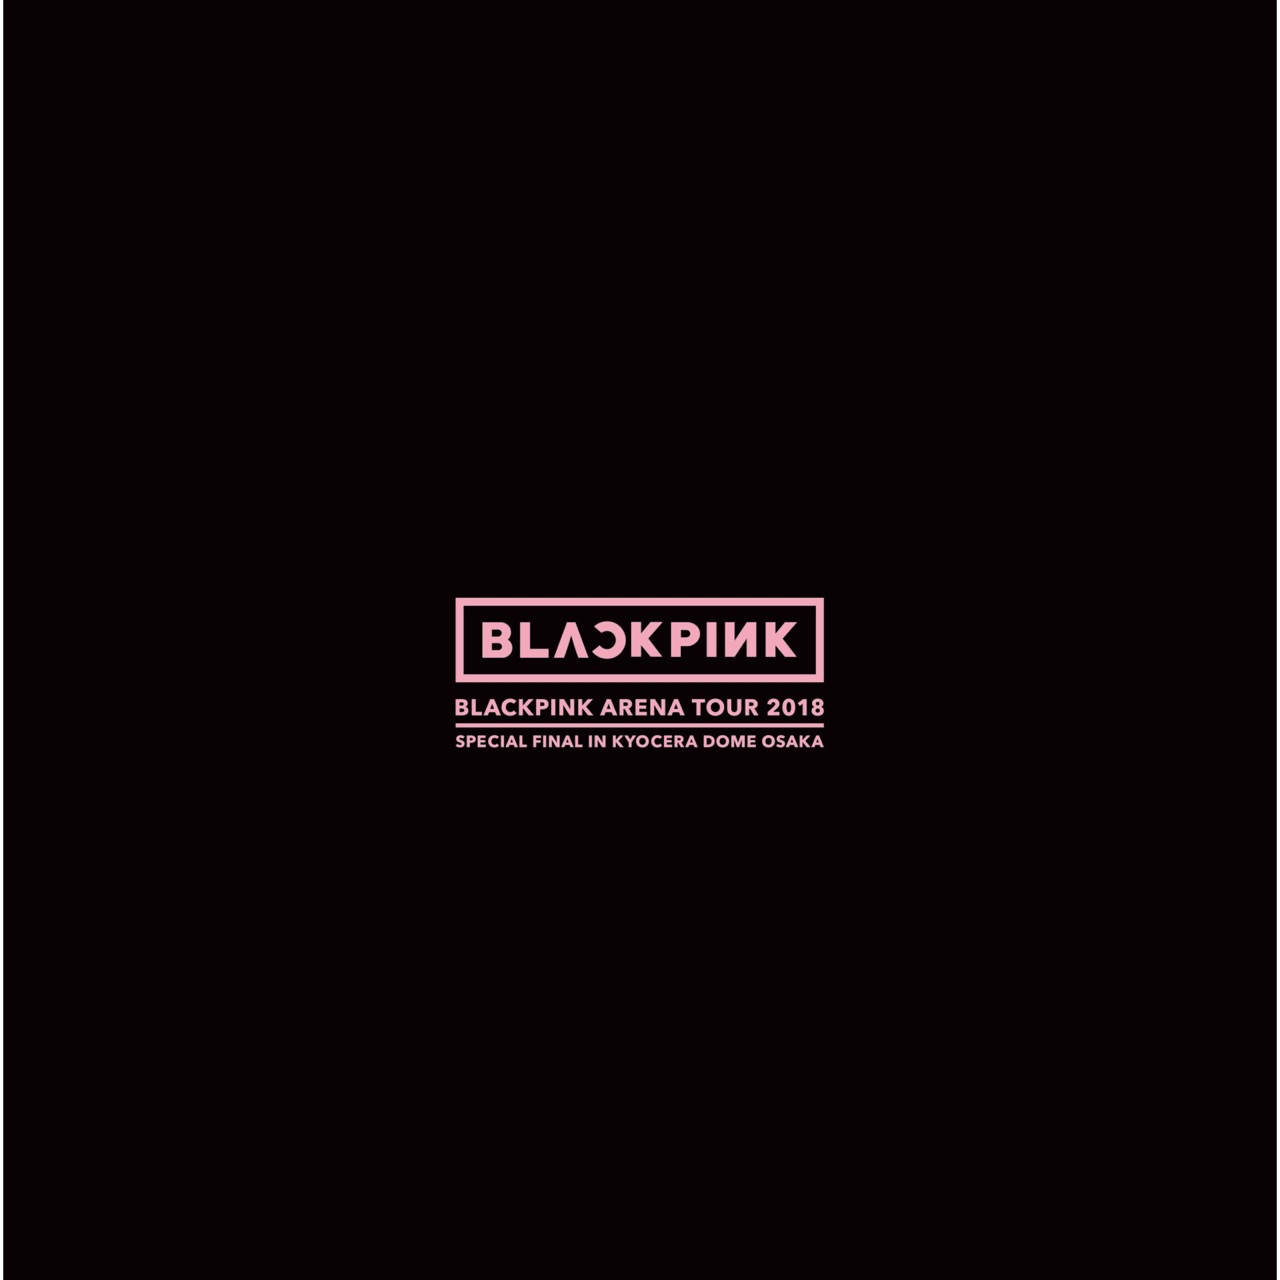 BLACKPINK — LAST CHRISTMAS 〜 RUDOLPH THE RED-NOSED REINDEER - BLACKPINK ARENA TOUR 2018 &quot;SPECIAL FINAL IN KYOCERA DOME OSAKA&quot; cover artwork